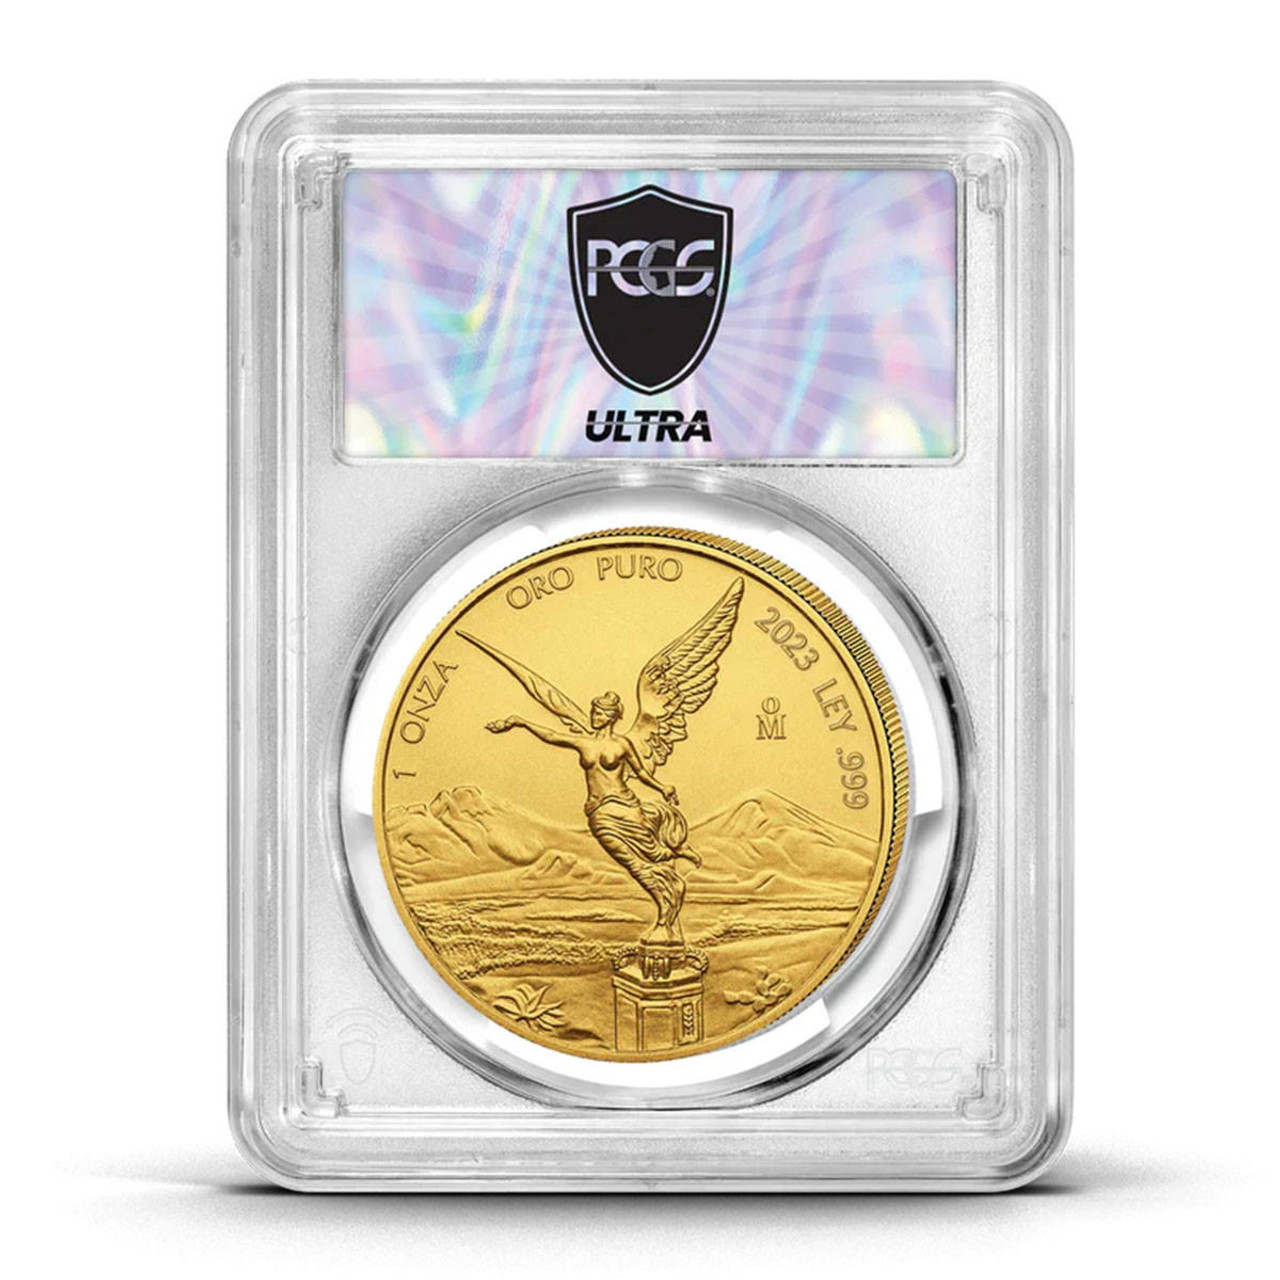 UltraBreaks Around The World - Featuring 1 Oz Silver PCGS MS70 